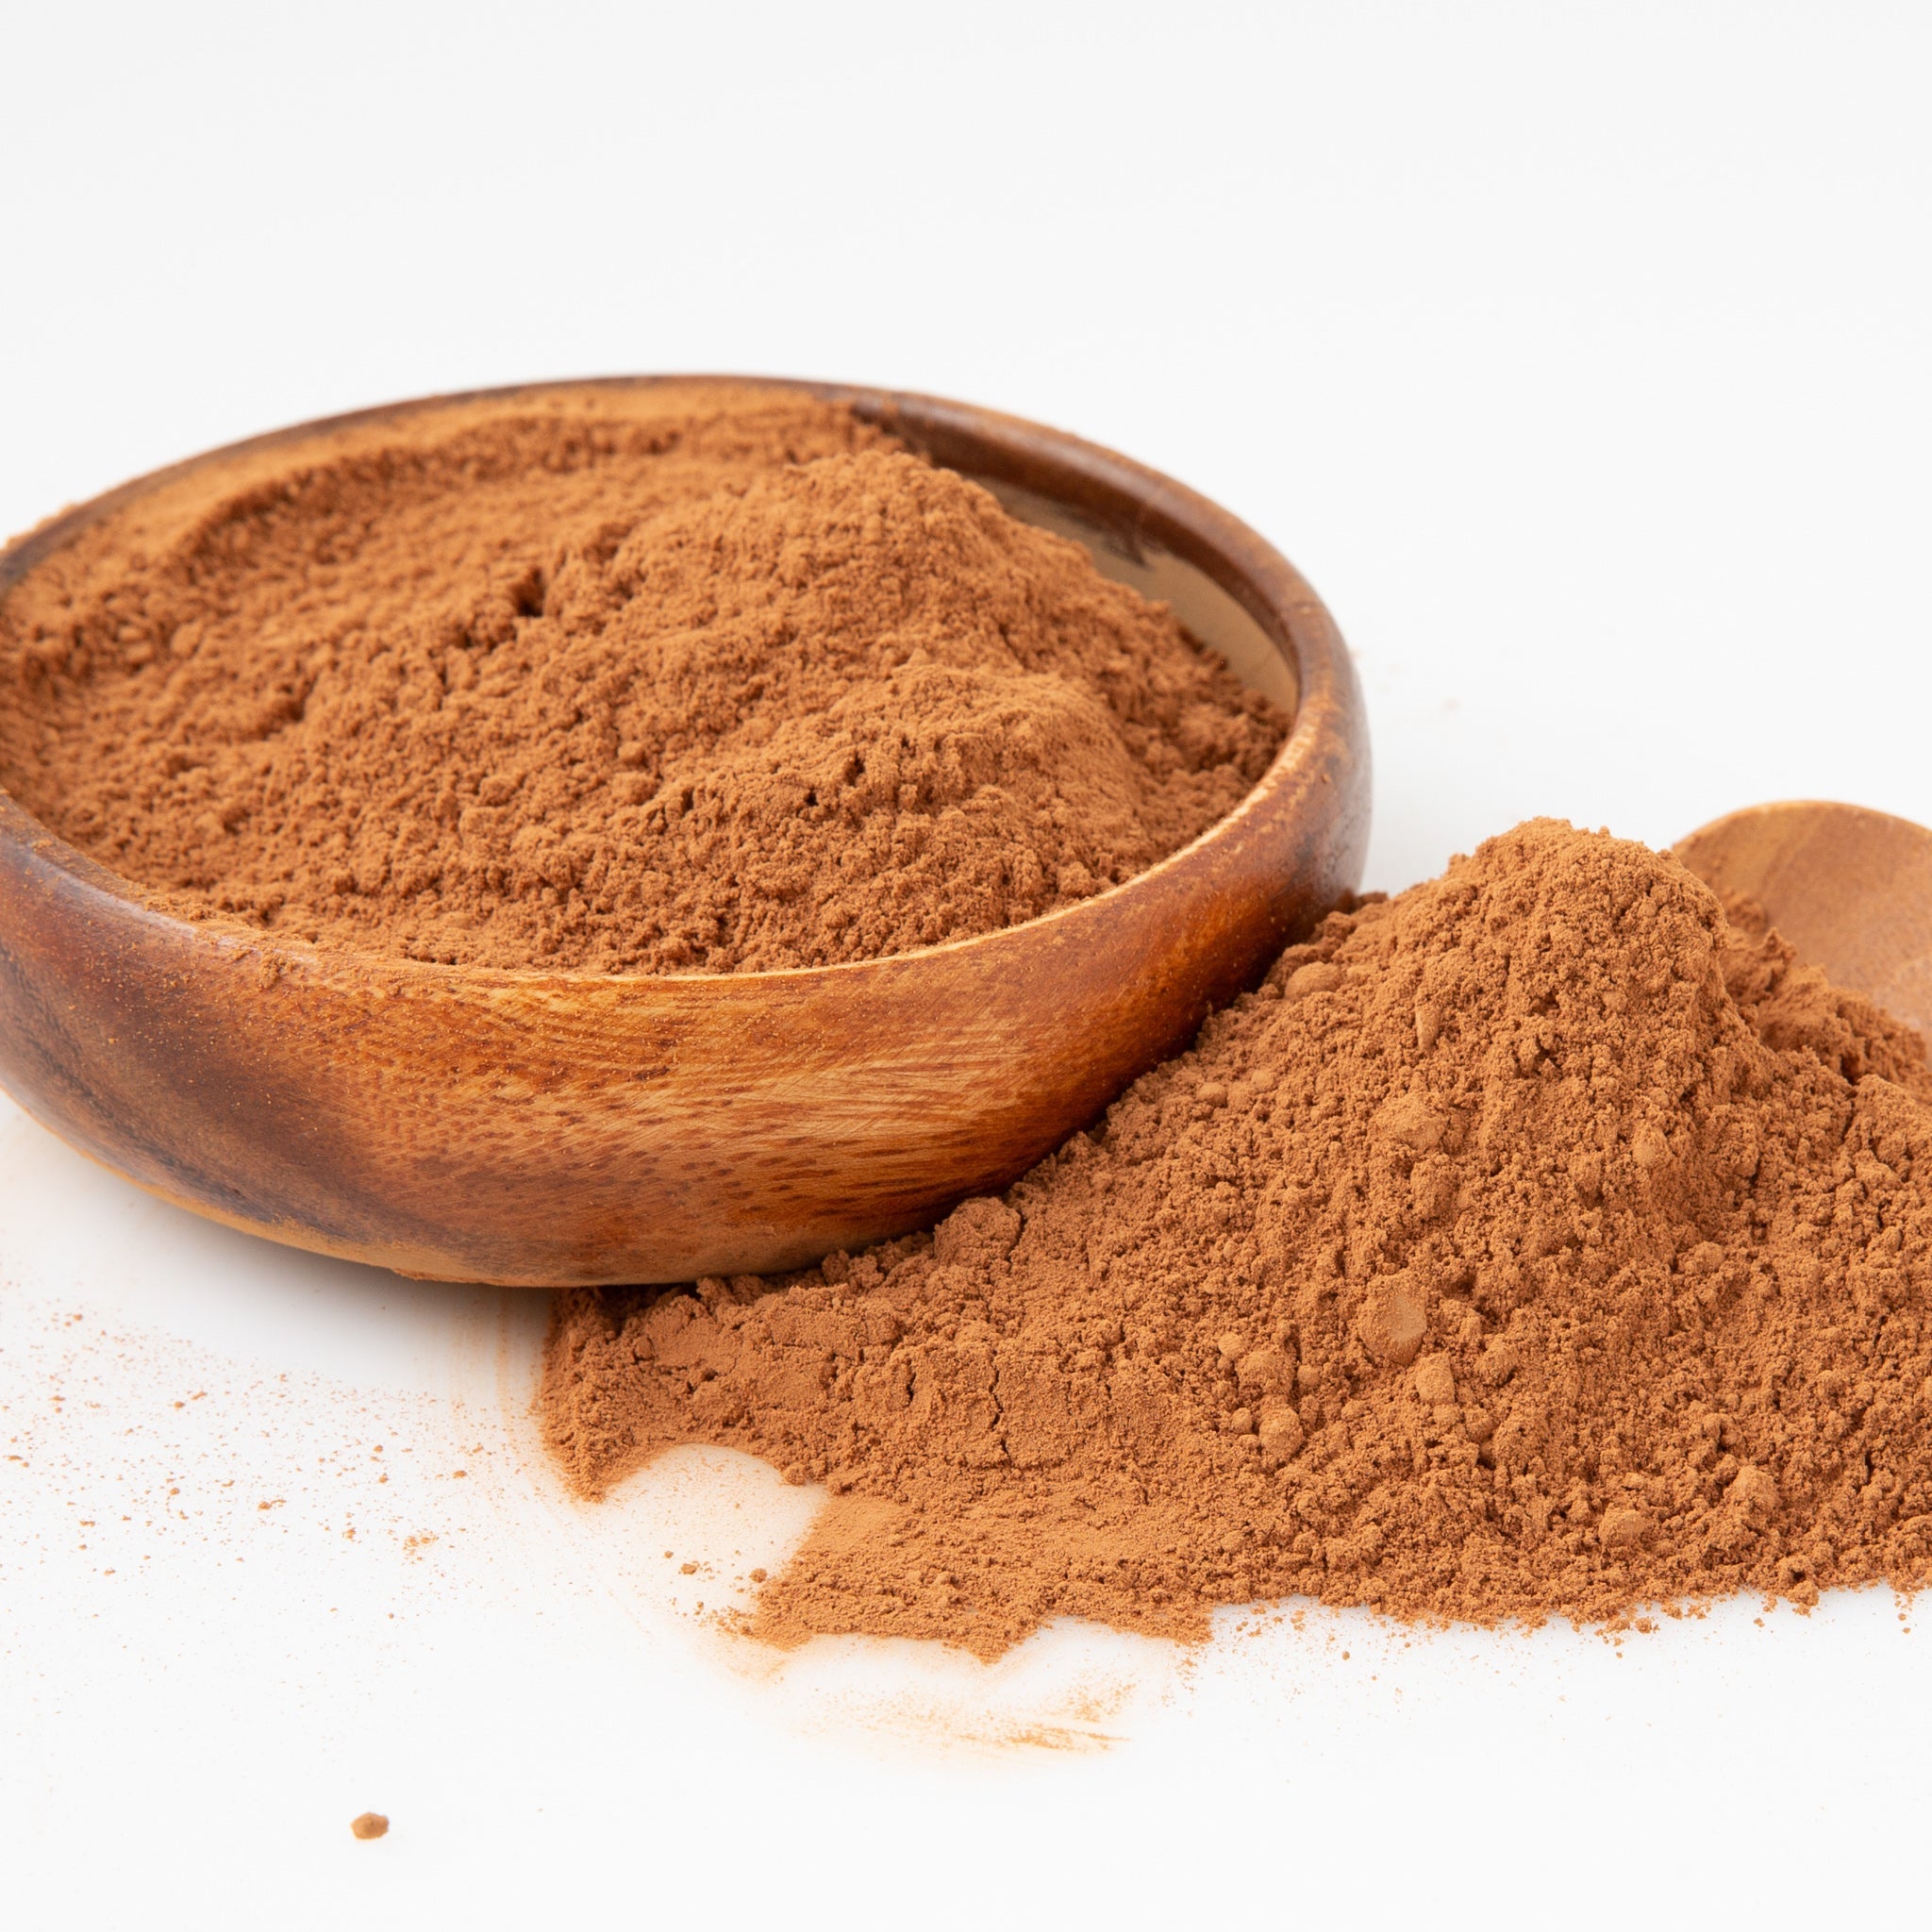 Organic Raw Cacao Powder (Superfoods) Image 3 - Naked Foods